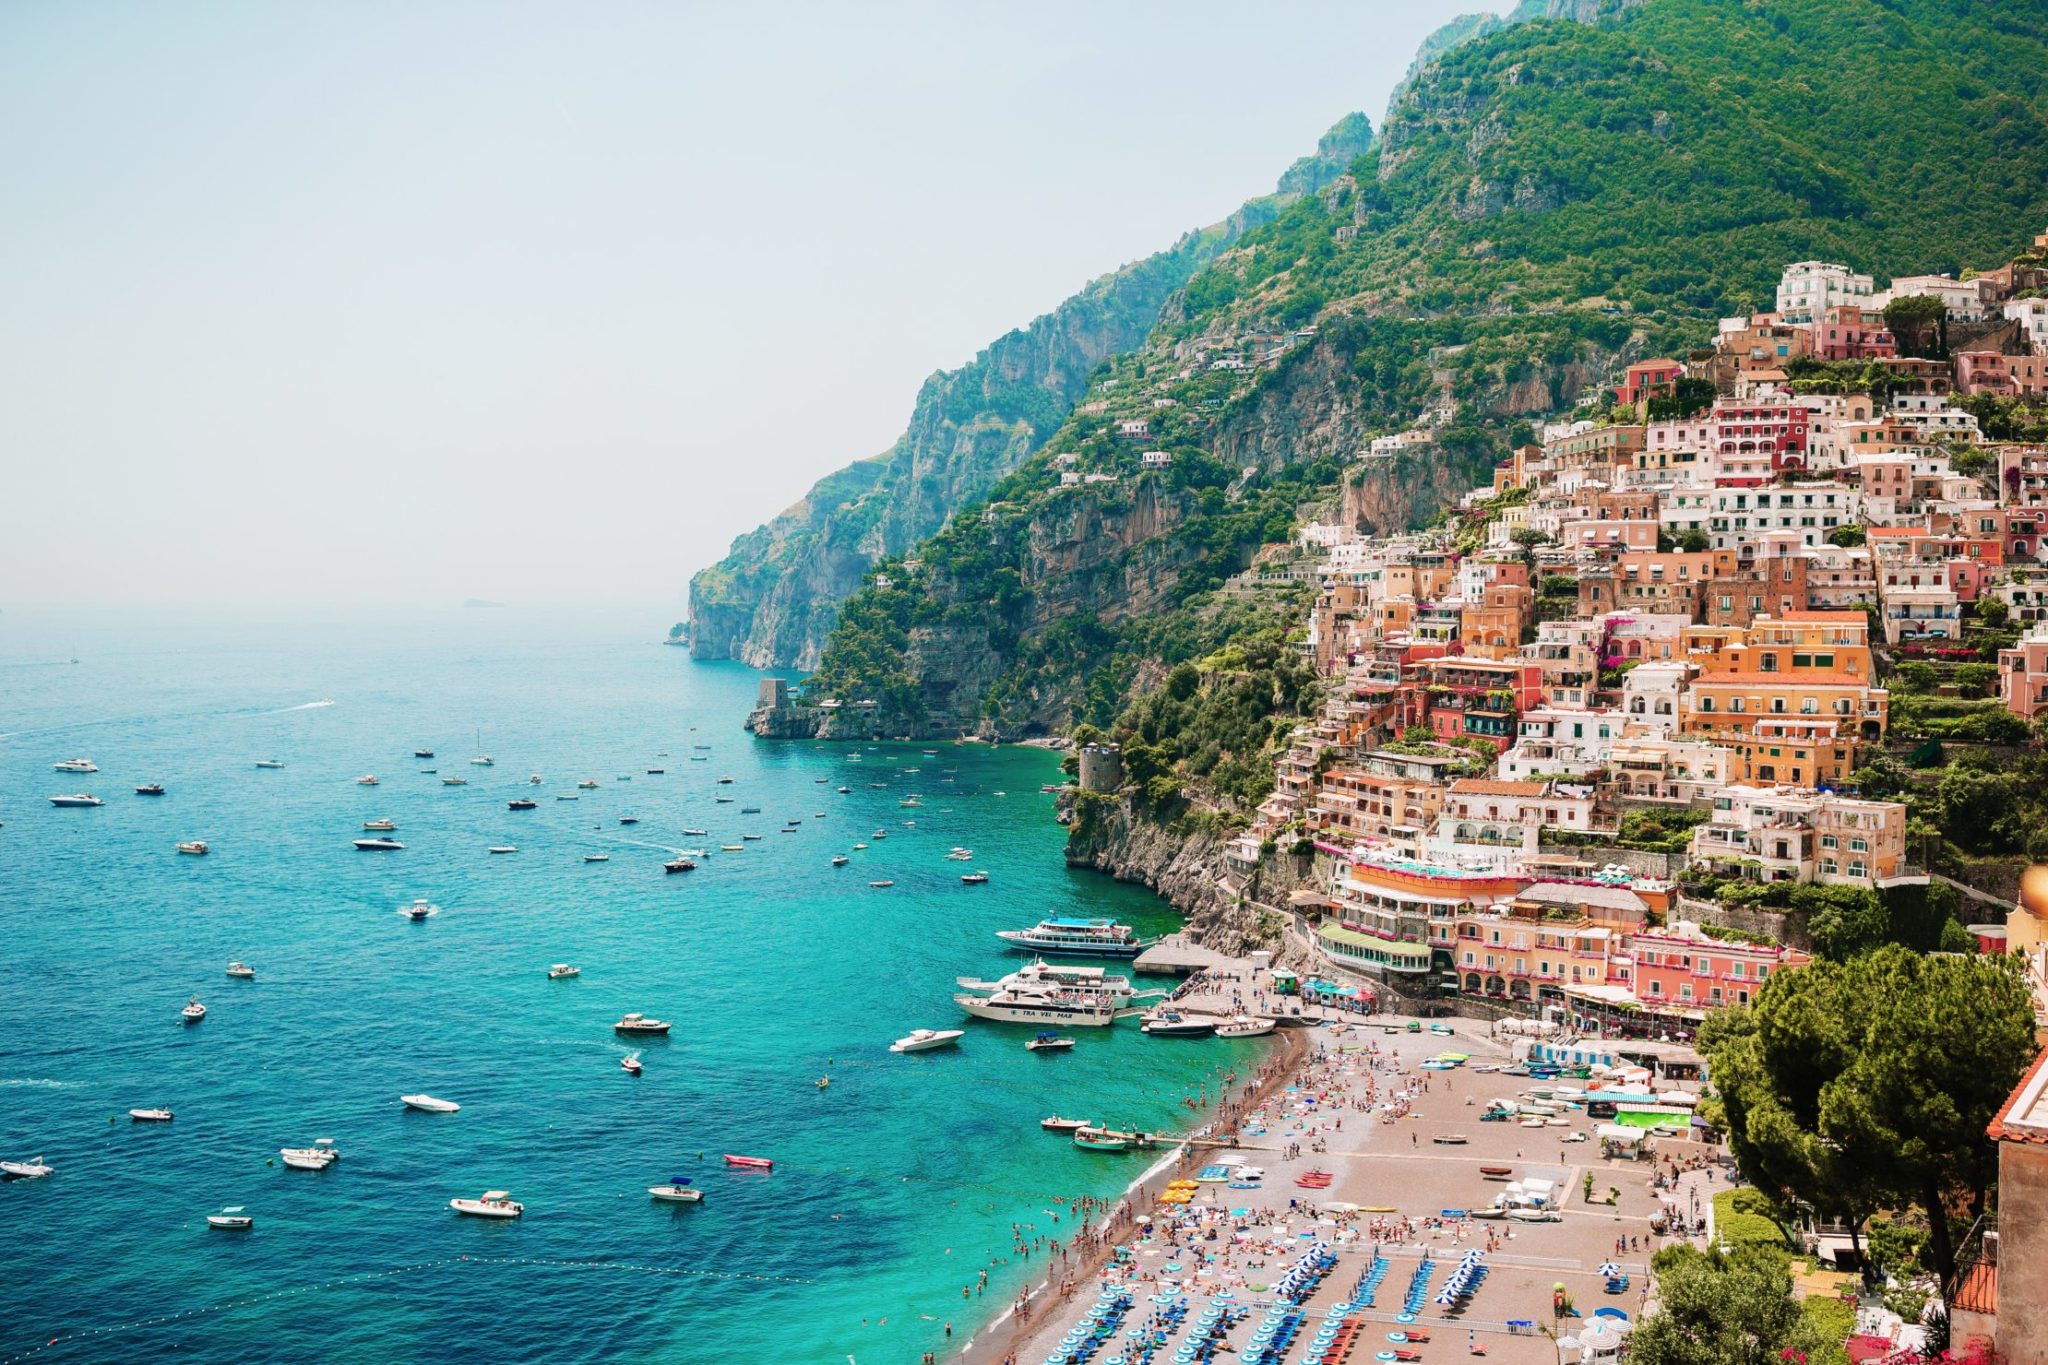 22 Beautiful Photos of Italy That Will Make You Fall In Love